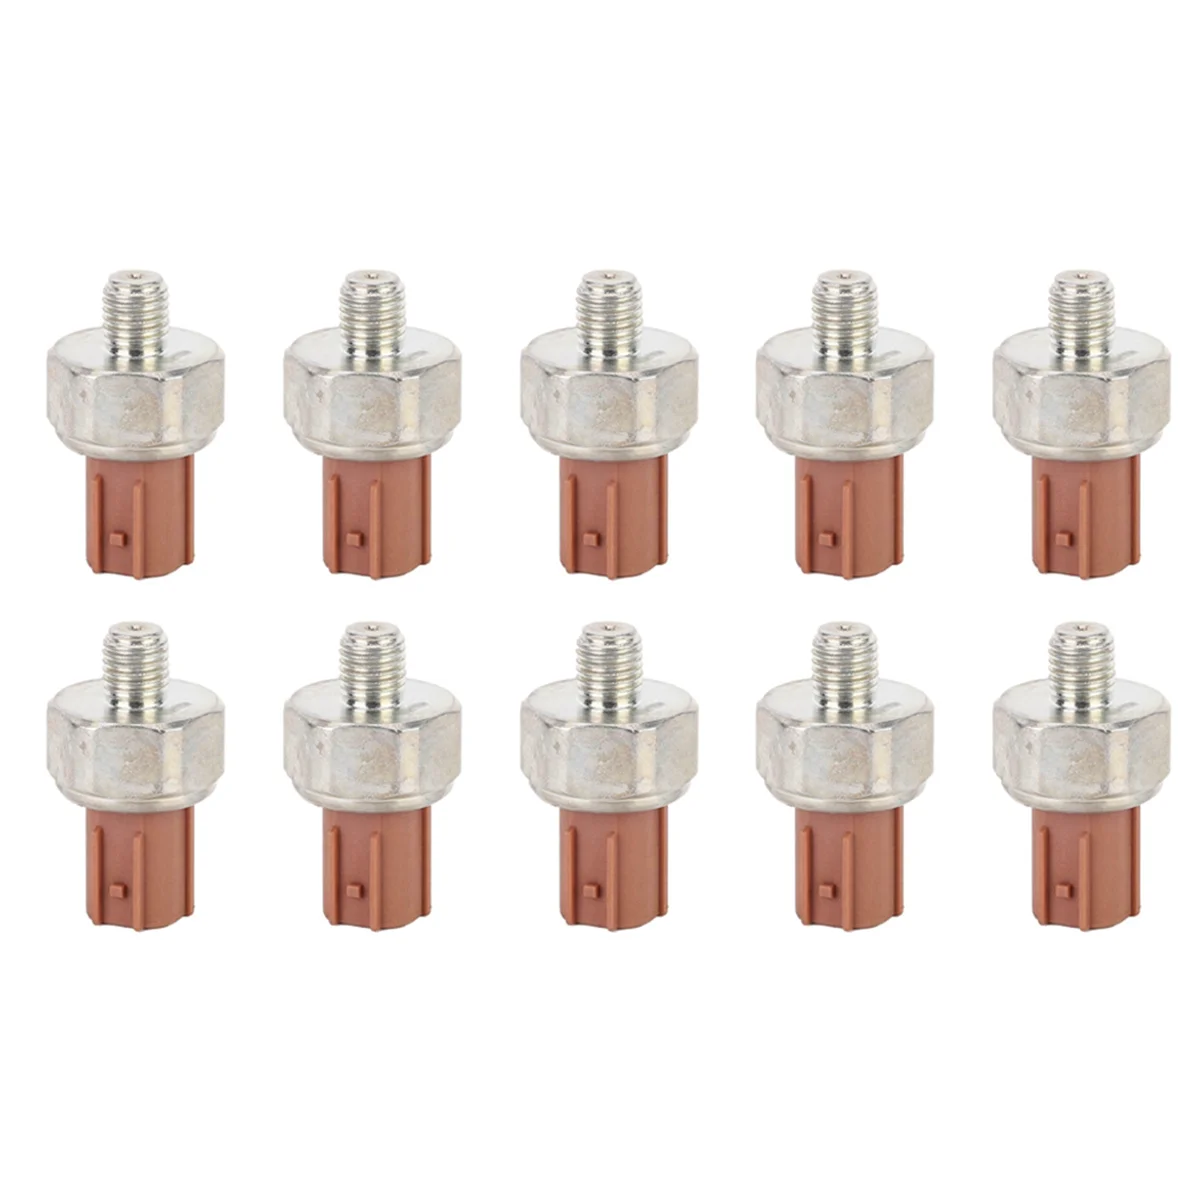 

10X 28600RPC004 Automatic Transmission Oil Pressure Switch for Honda CIVIC 06-11